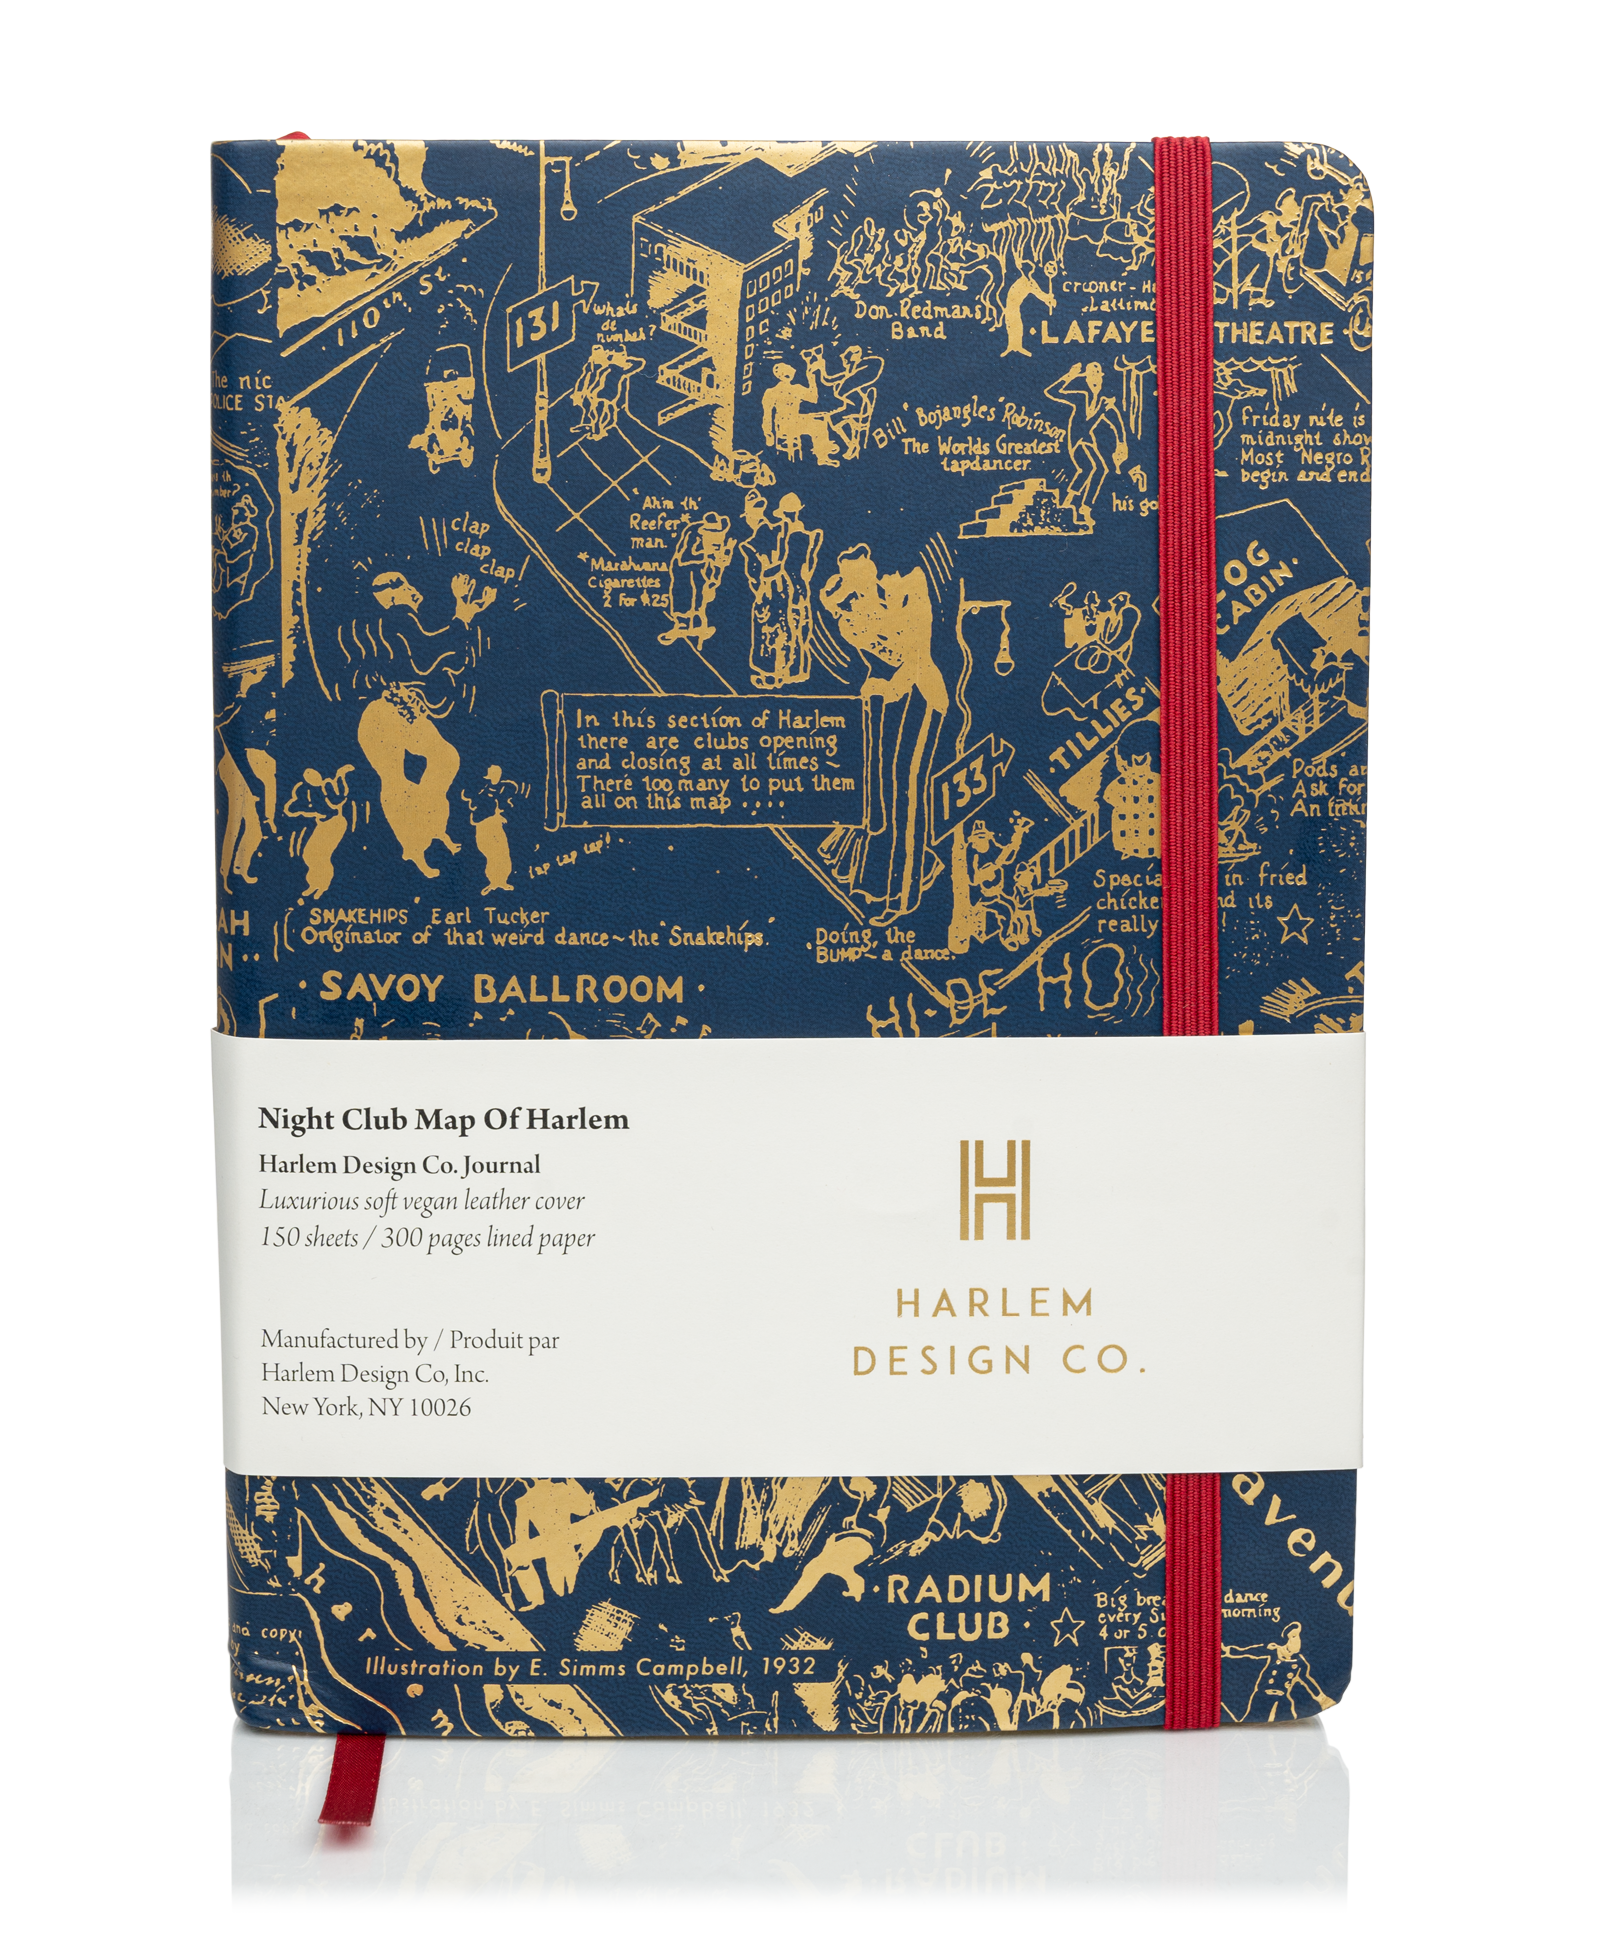 This is a product image of the Harlem Design Co “A Nightclub Map of Harlem” journal in Blue and Gold.  This image has the product information sleeve on the outside.